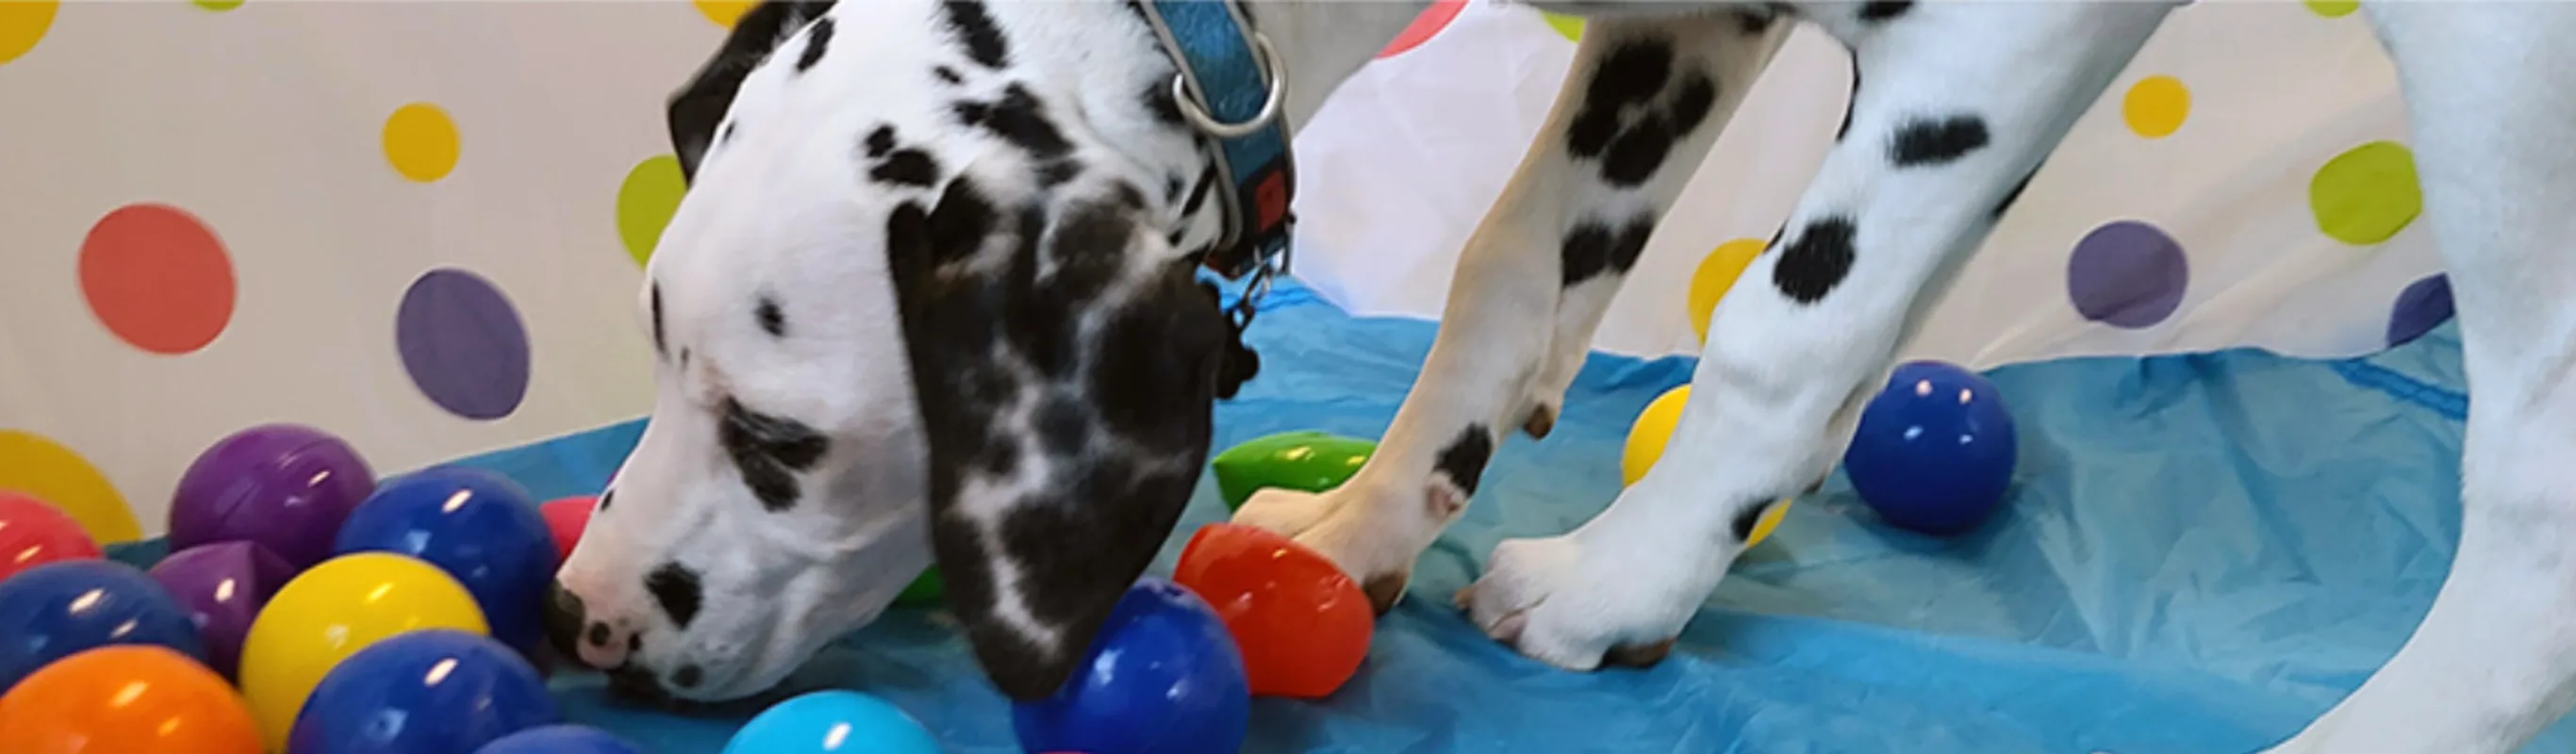 A Dalmatian (Dog) Playing with Colorful Balls